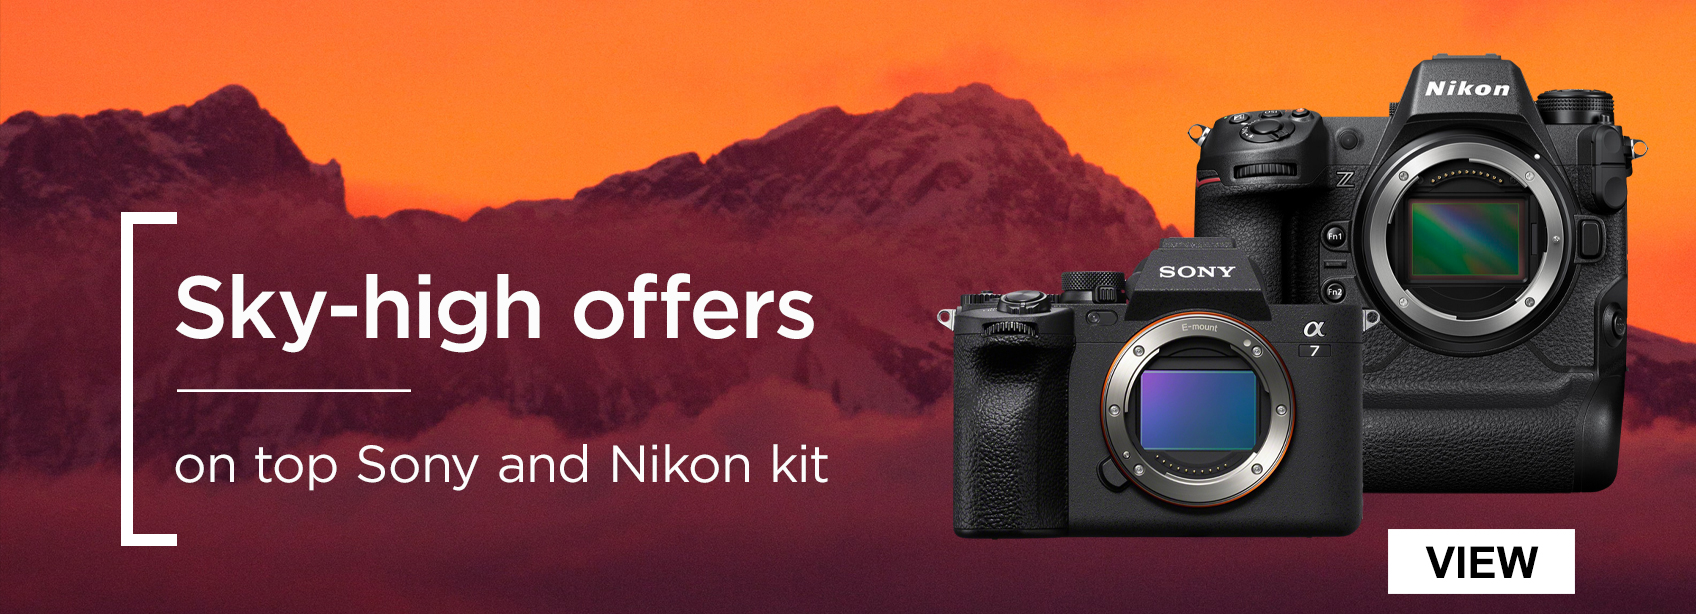 Sky-high offers on top Sony and Nikon kit